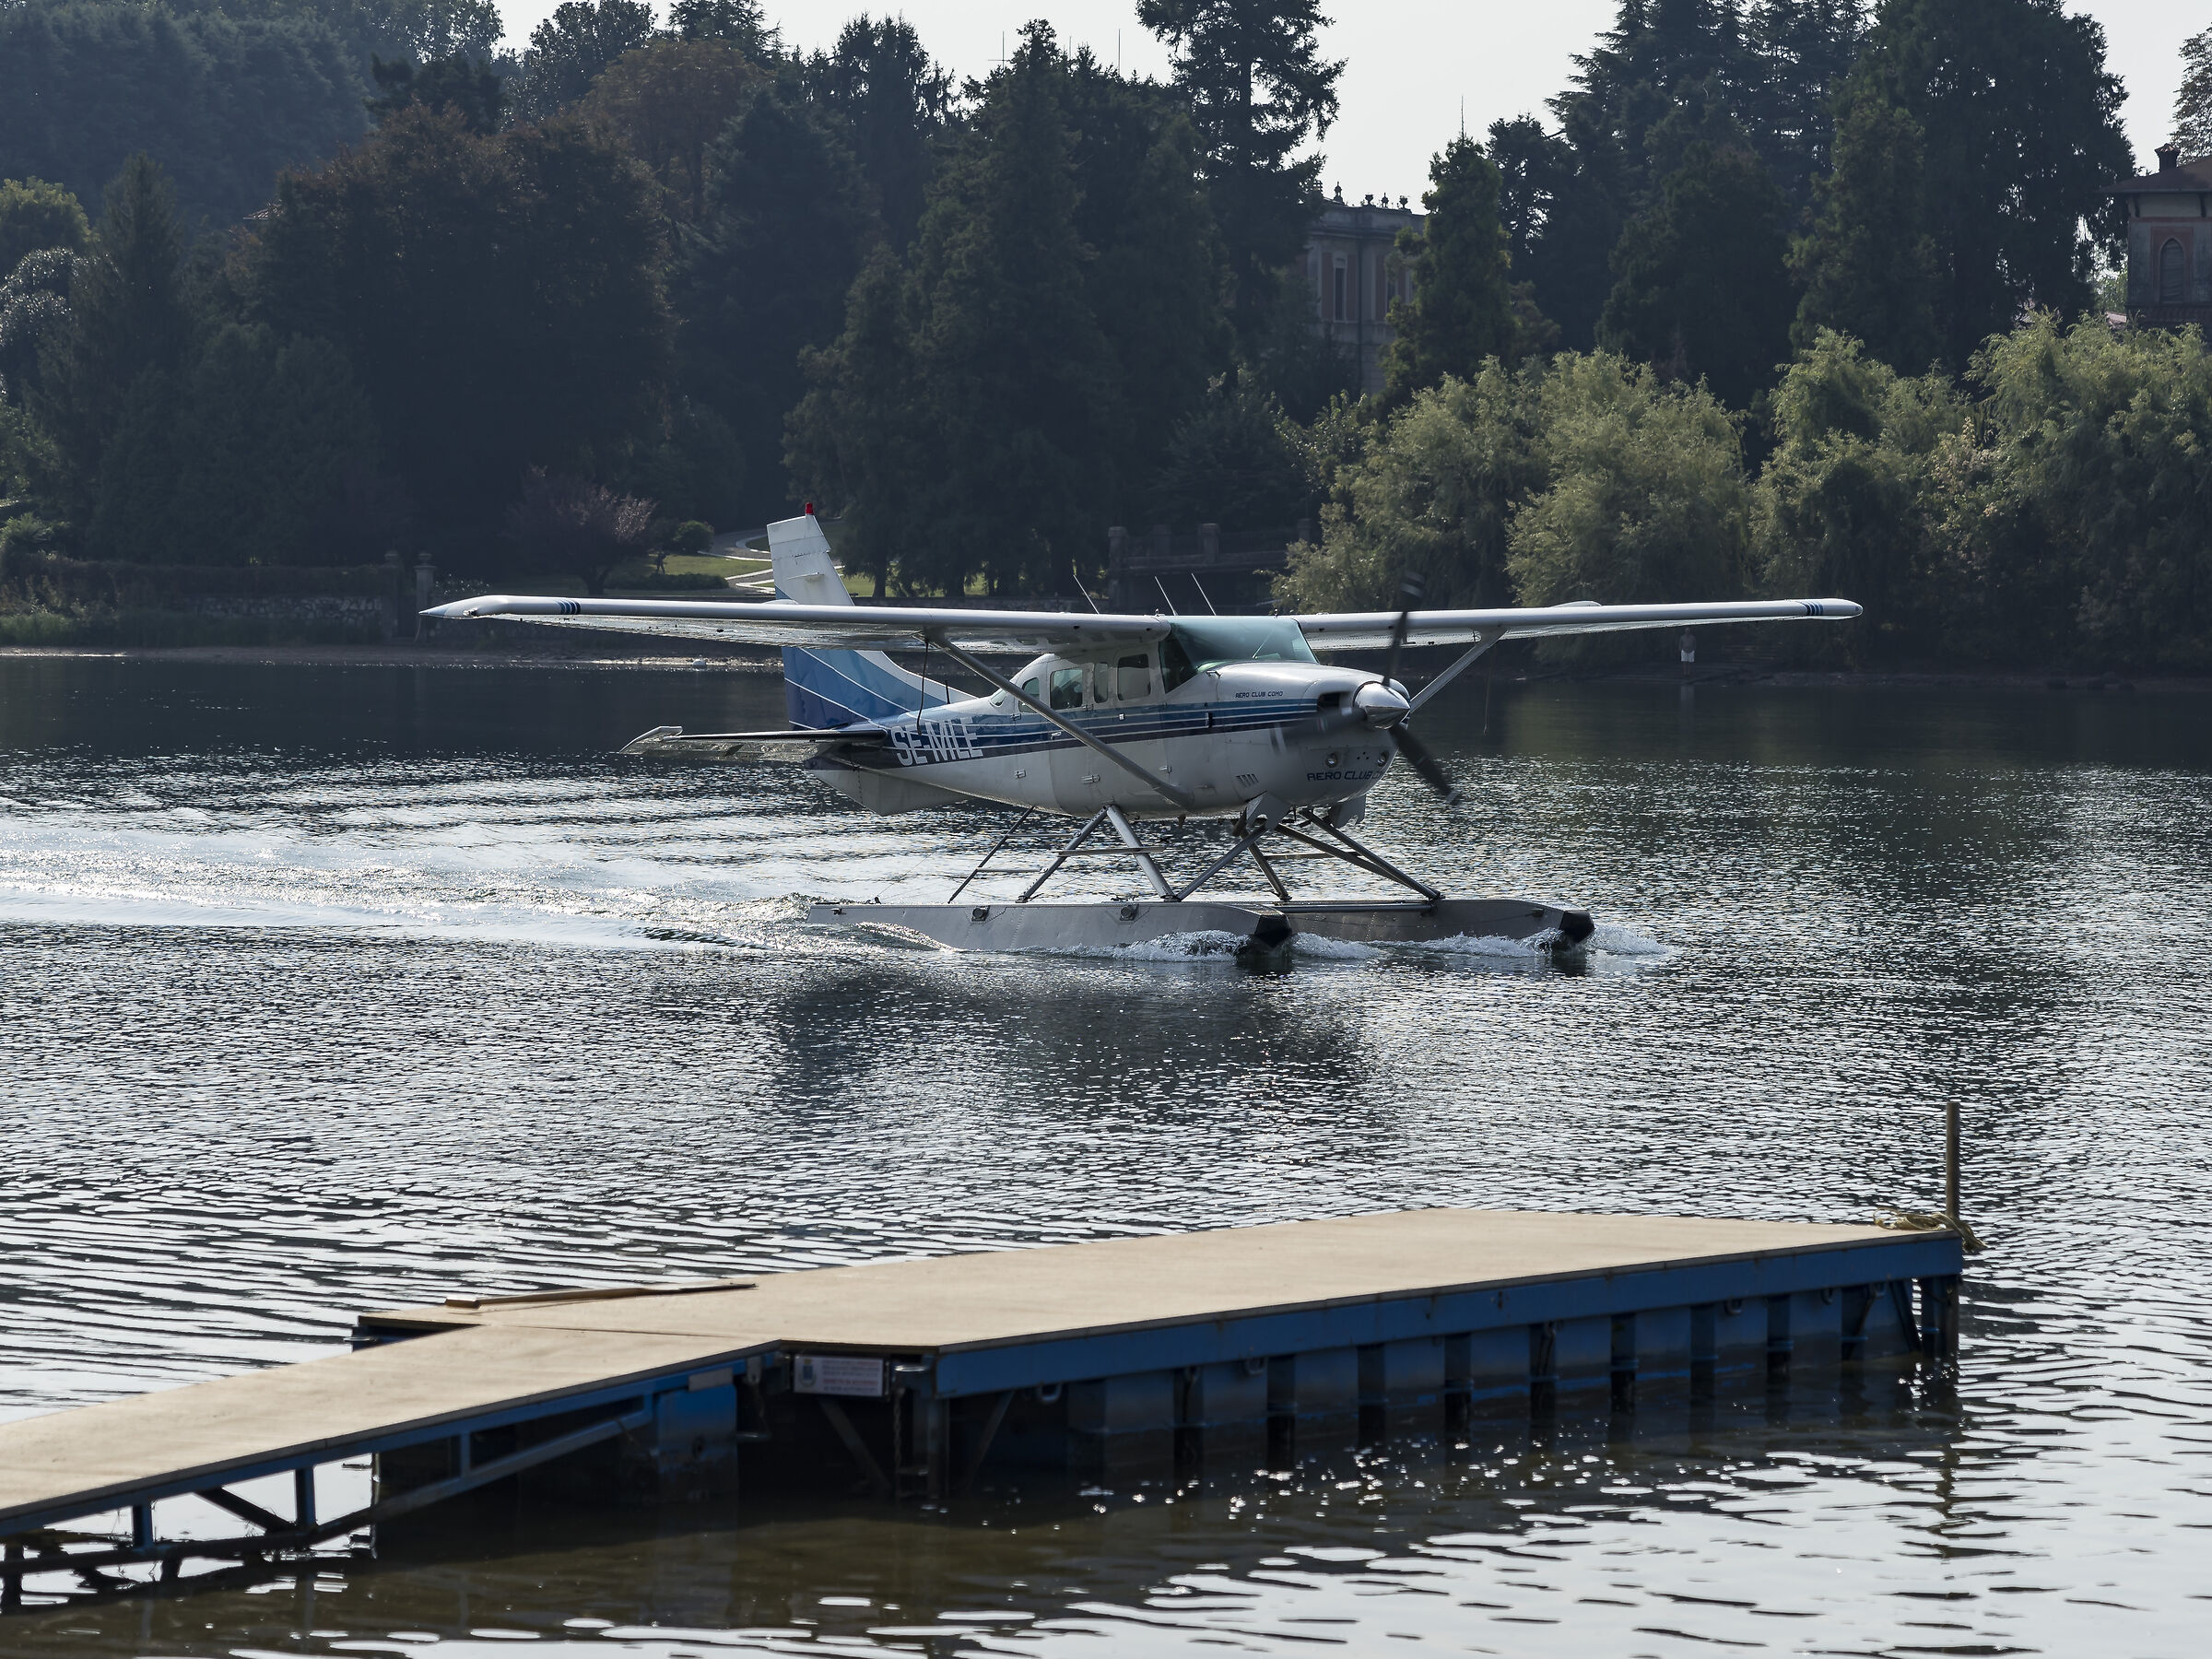 Docking of the Cessna 172 "Skyhawk" at the wharf - 1...